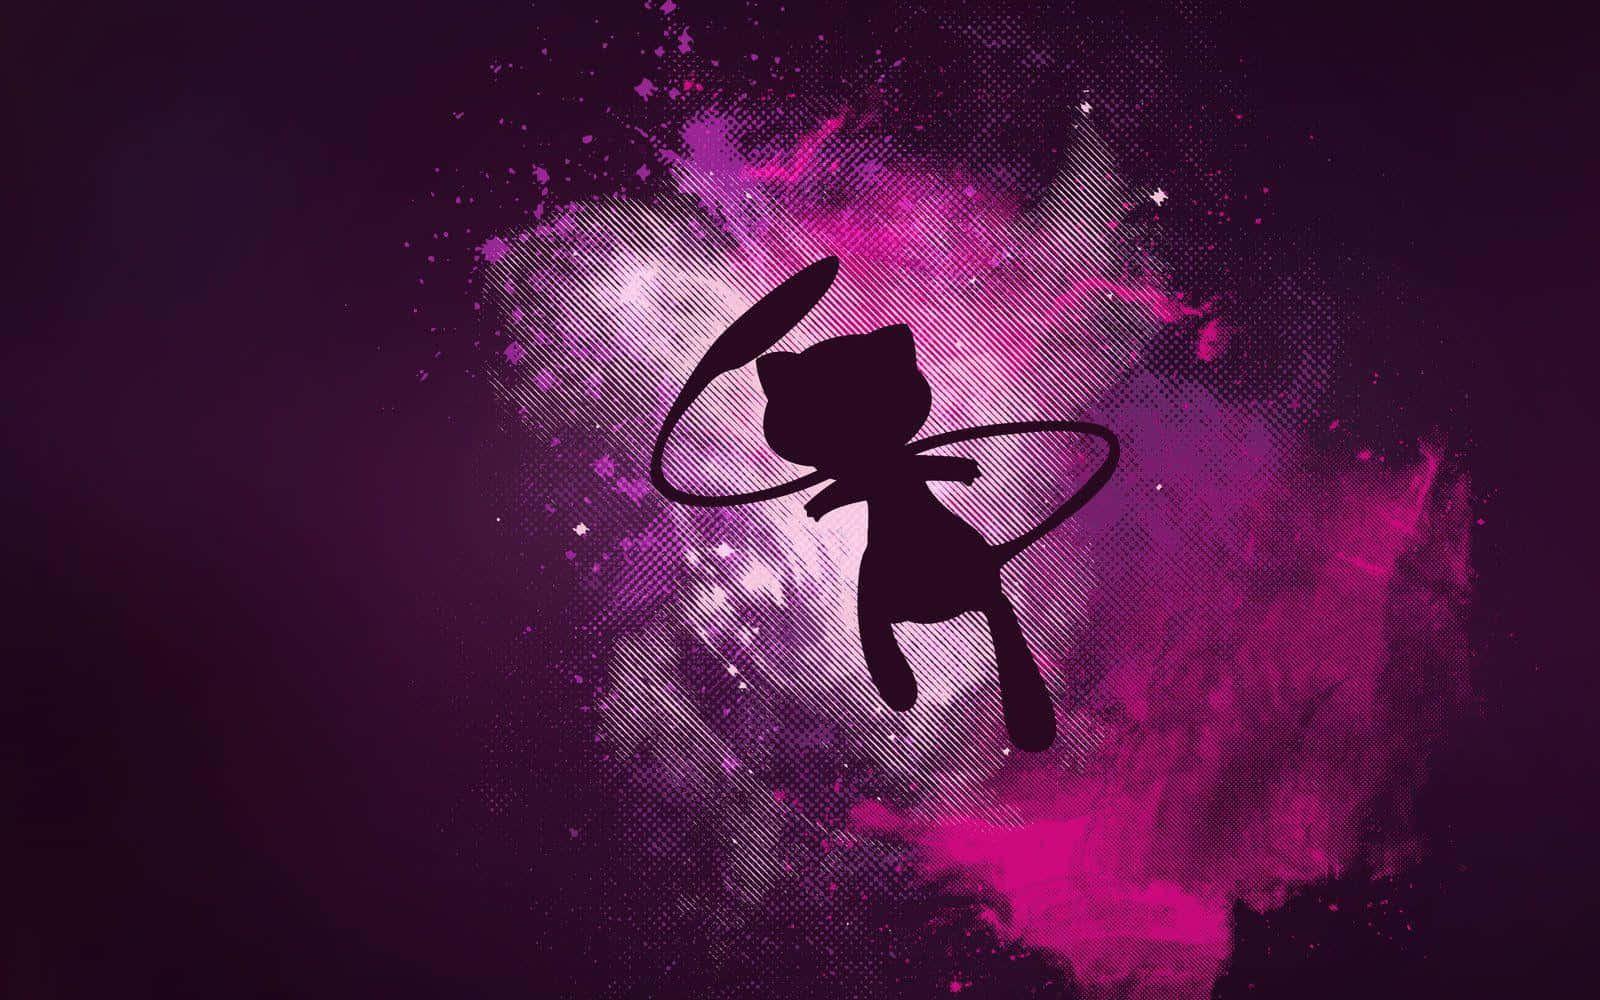 Get lost in the magical world of Mew